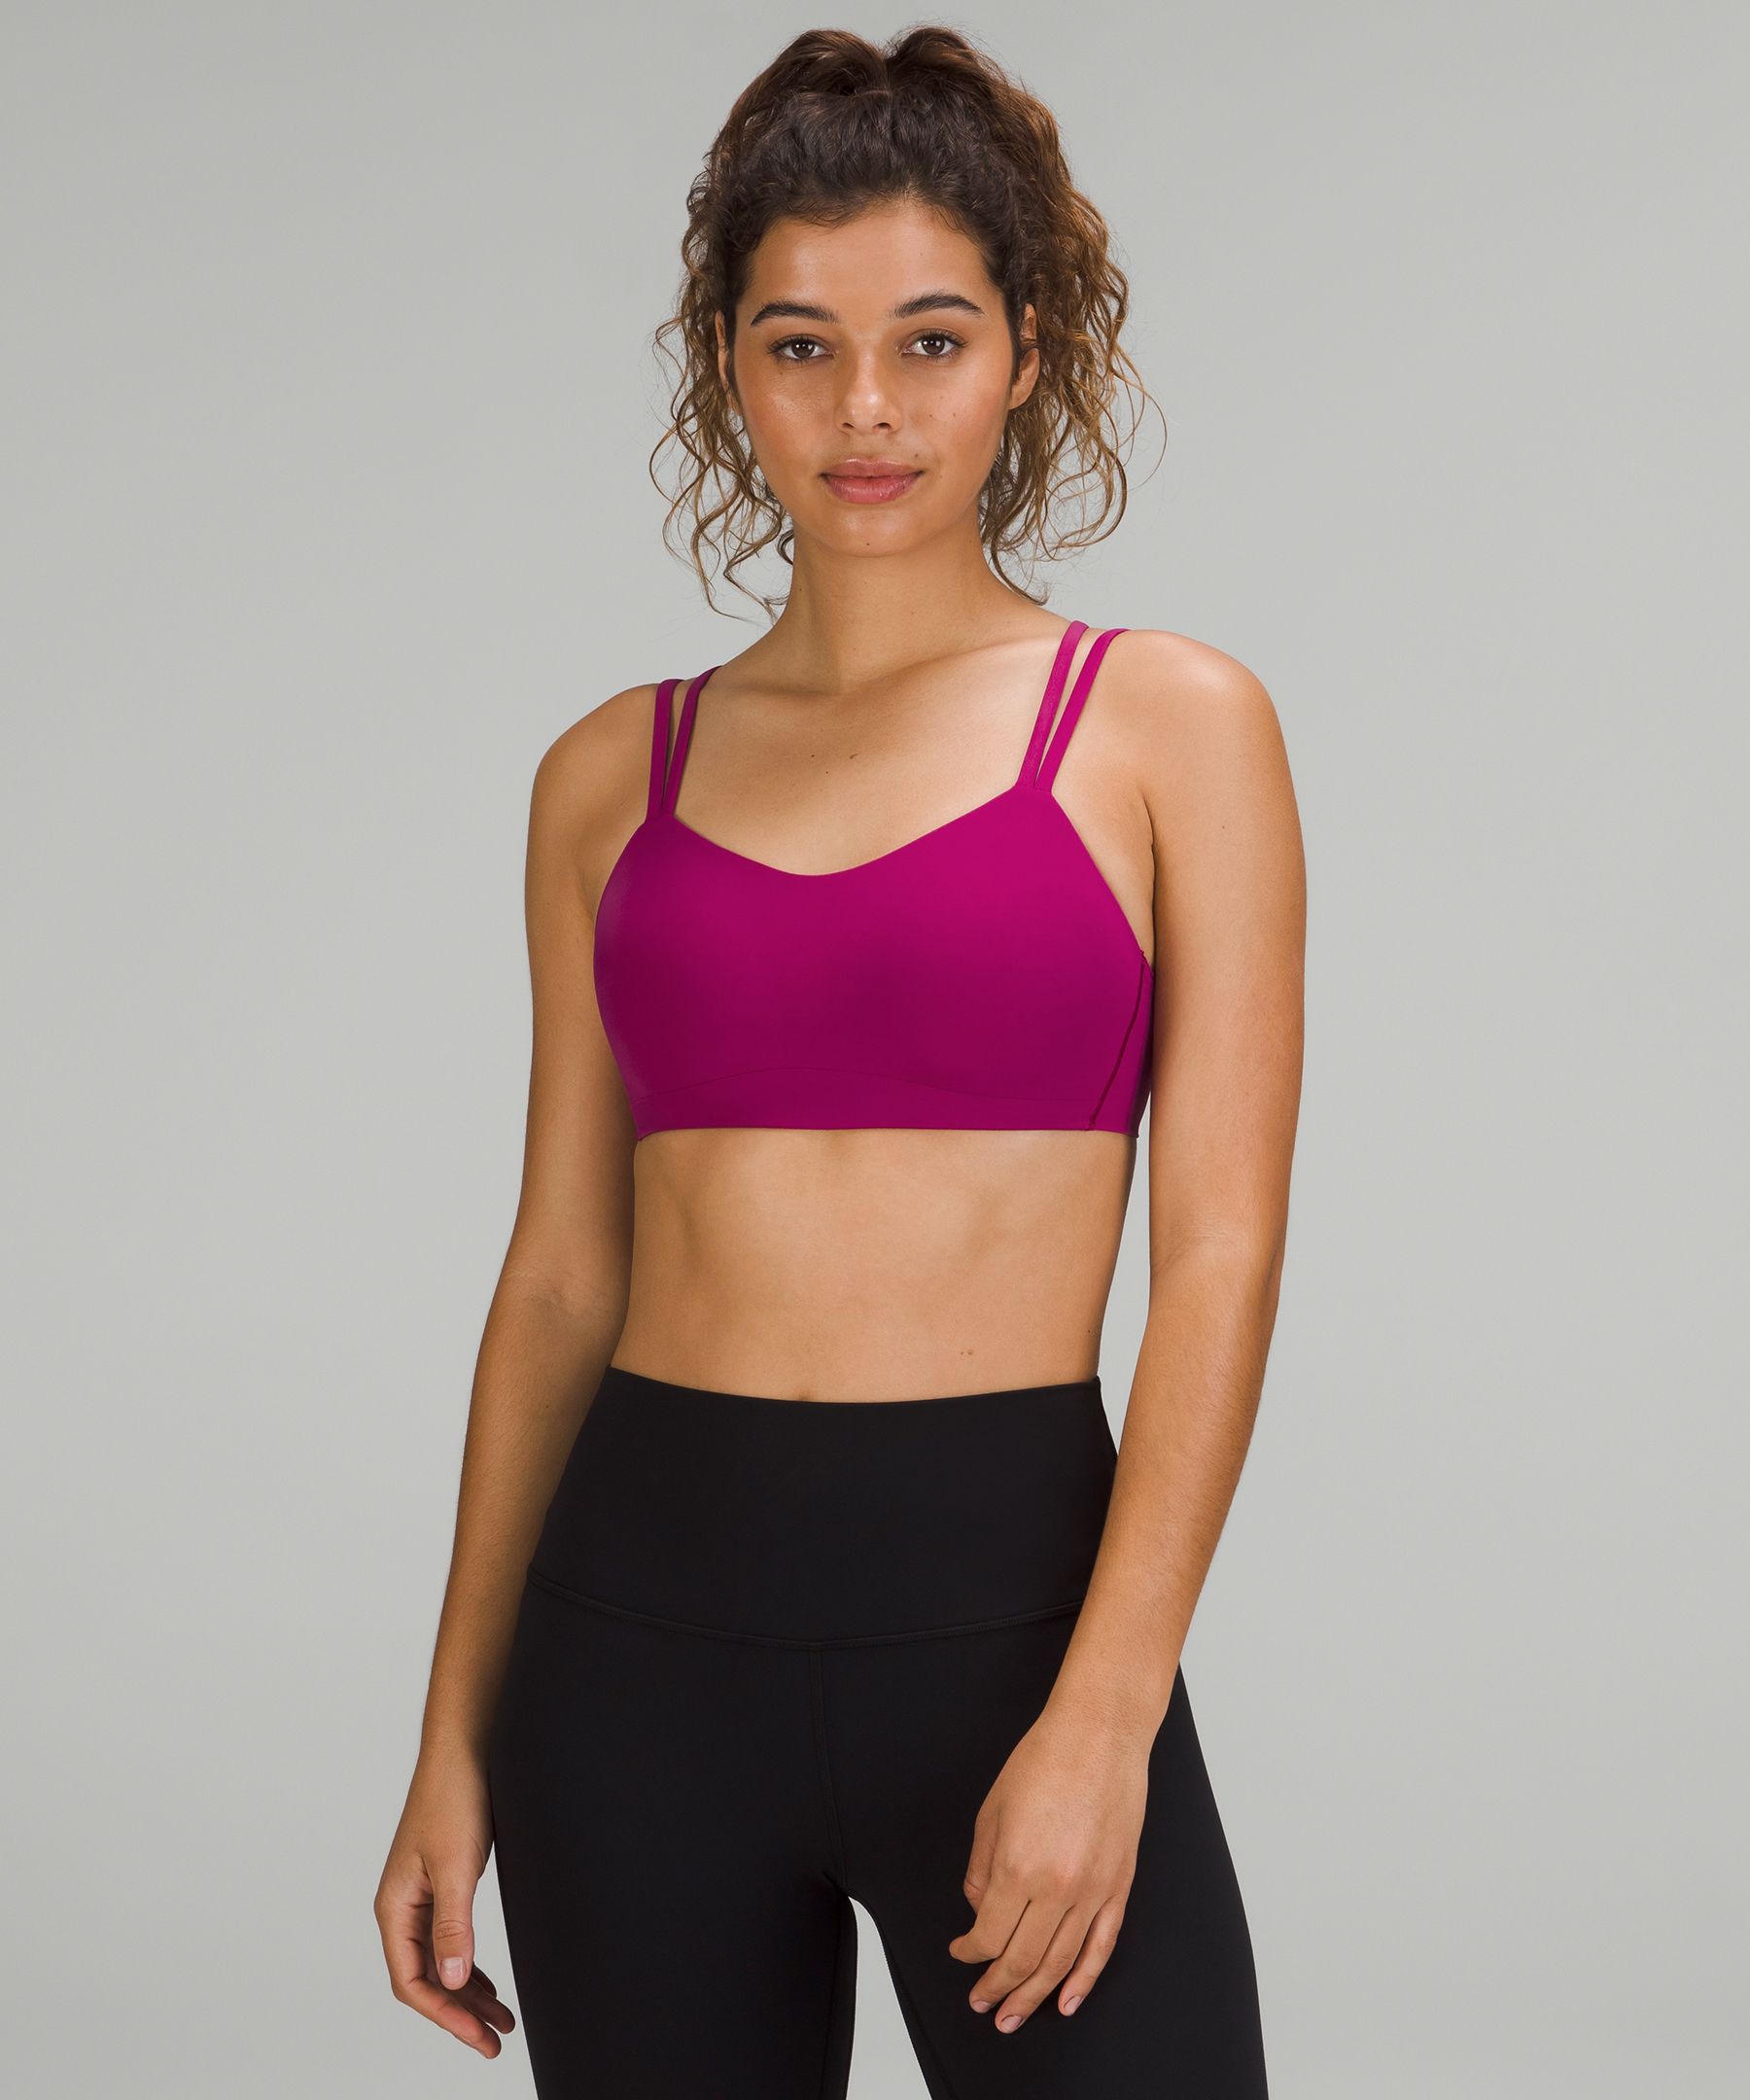 Lululemon Like A Cloud Bra Light Support, B/c Cup In Pink Lychee